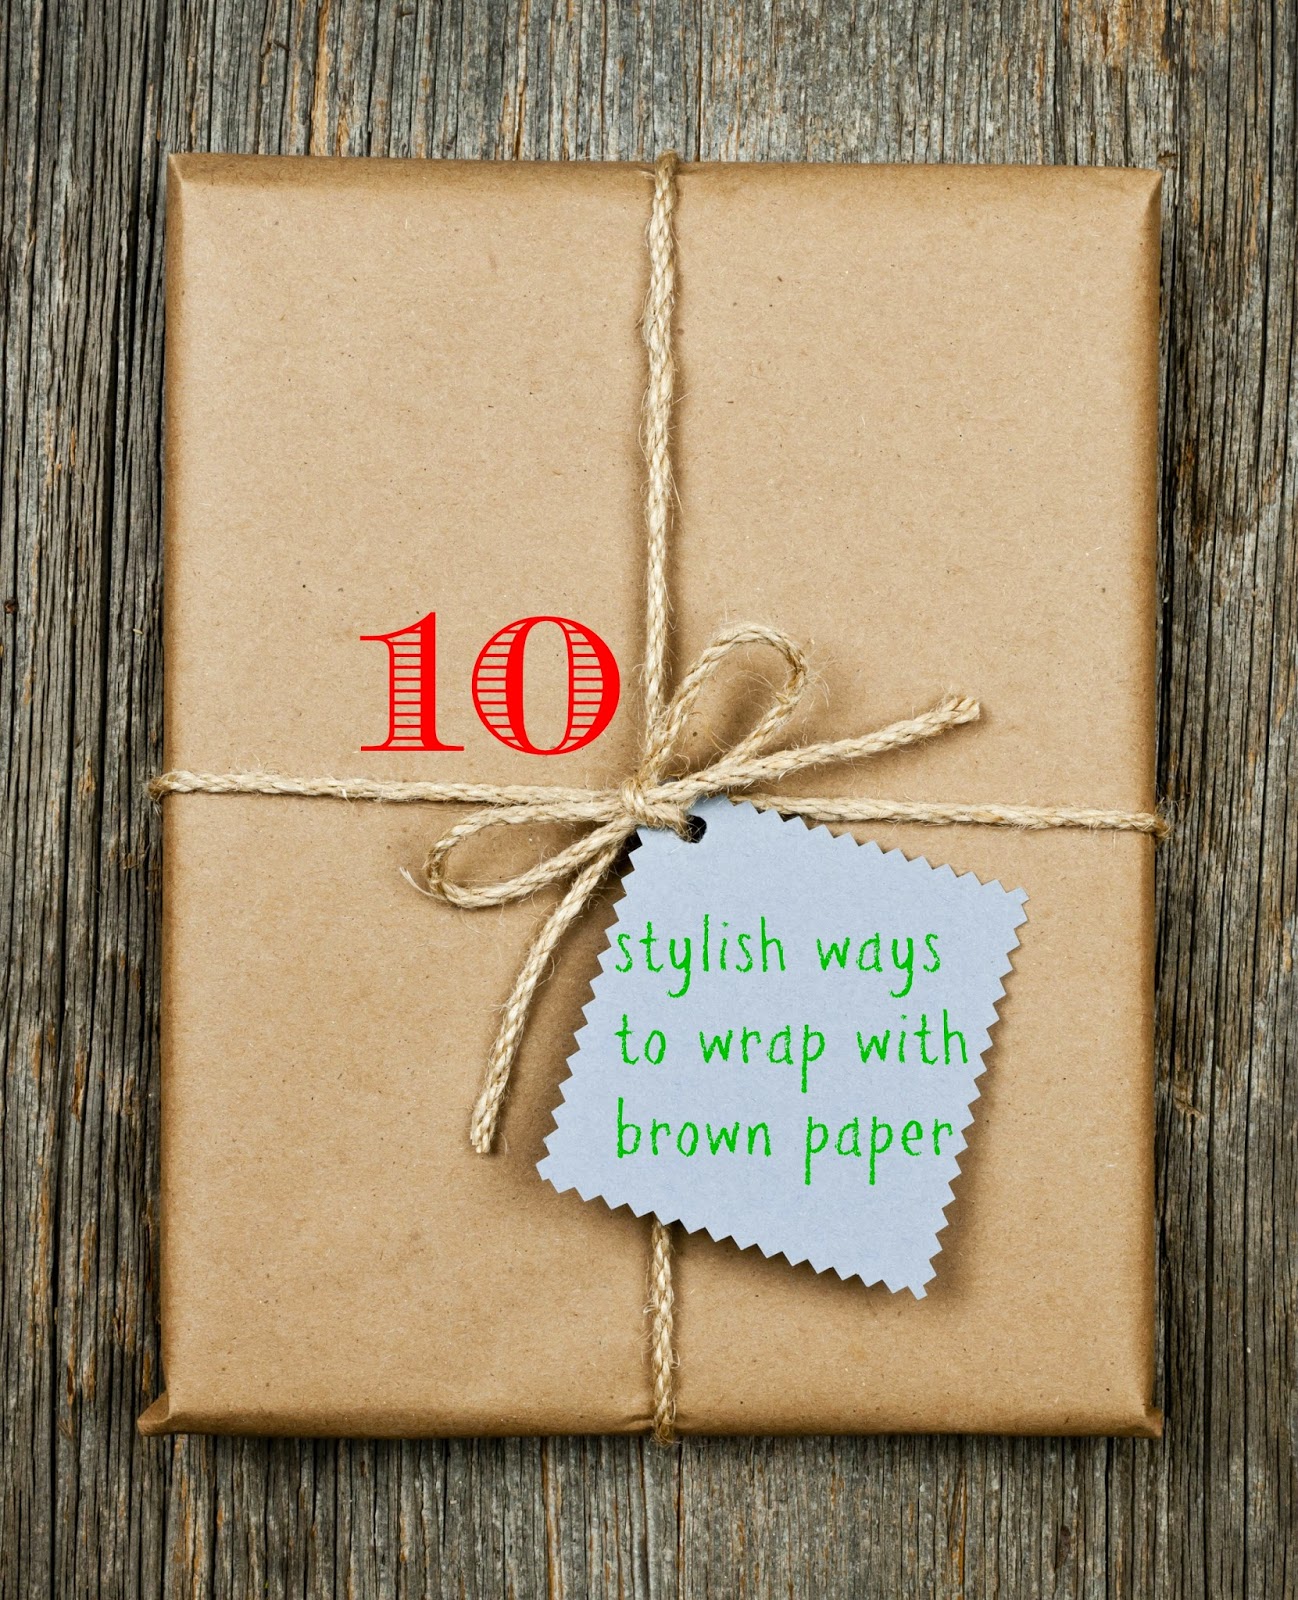 10 Stylish ways to wrap those Christmas gifts with brown paper! | christmas gift wrapping | brown paper | mamasVIB | christmas crafts | simple wrapping ides | brown paper wrapping | gift wrap | pinterest ideas | blog | mamas VIB | bonita turner | christmas gift ideas | brown paper table cloth | craft christmas | cheap wrap ideas | gift tags | simple idea for DIY wrapping | brown paper